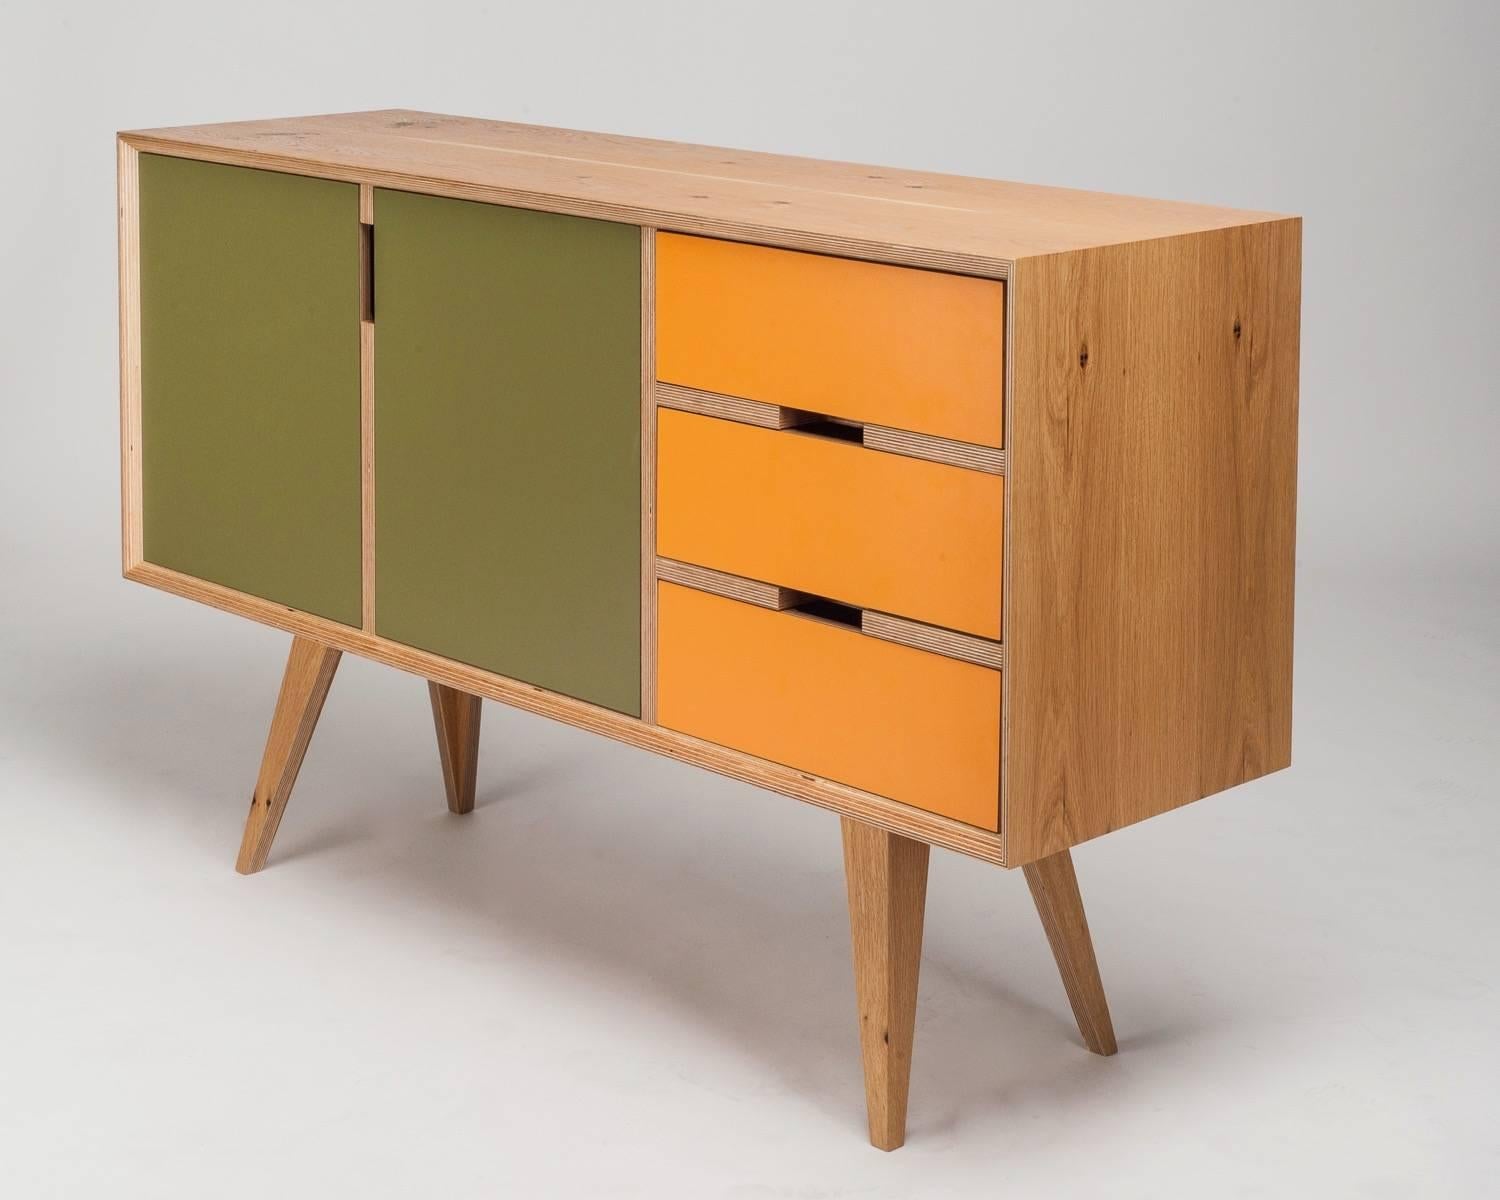 The Otto sideboard is handcrafted and made to order, so veneer finishes, colored door fronts and dimensions can be altered.
Seen here in European oak with olive green and yellowy orange. Please enquire for available colours.